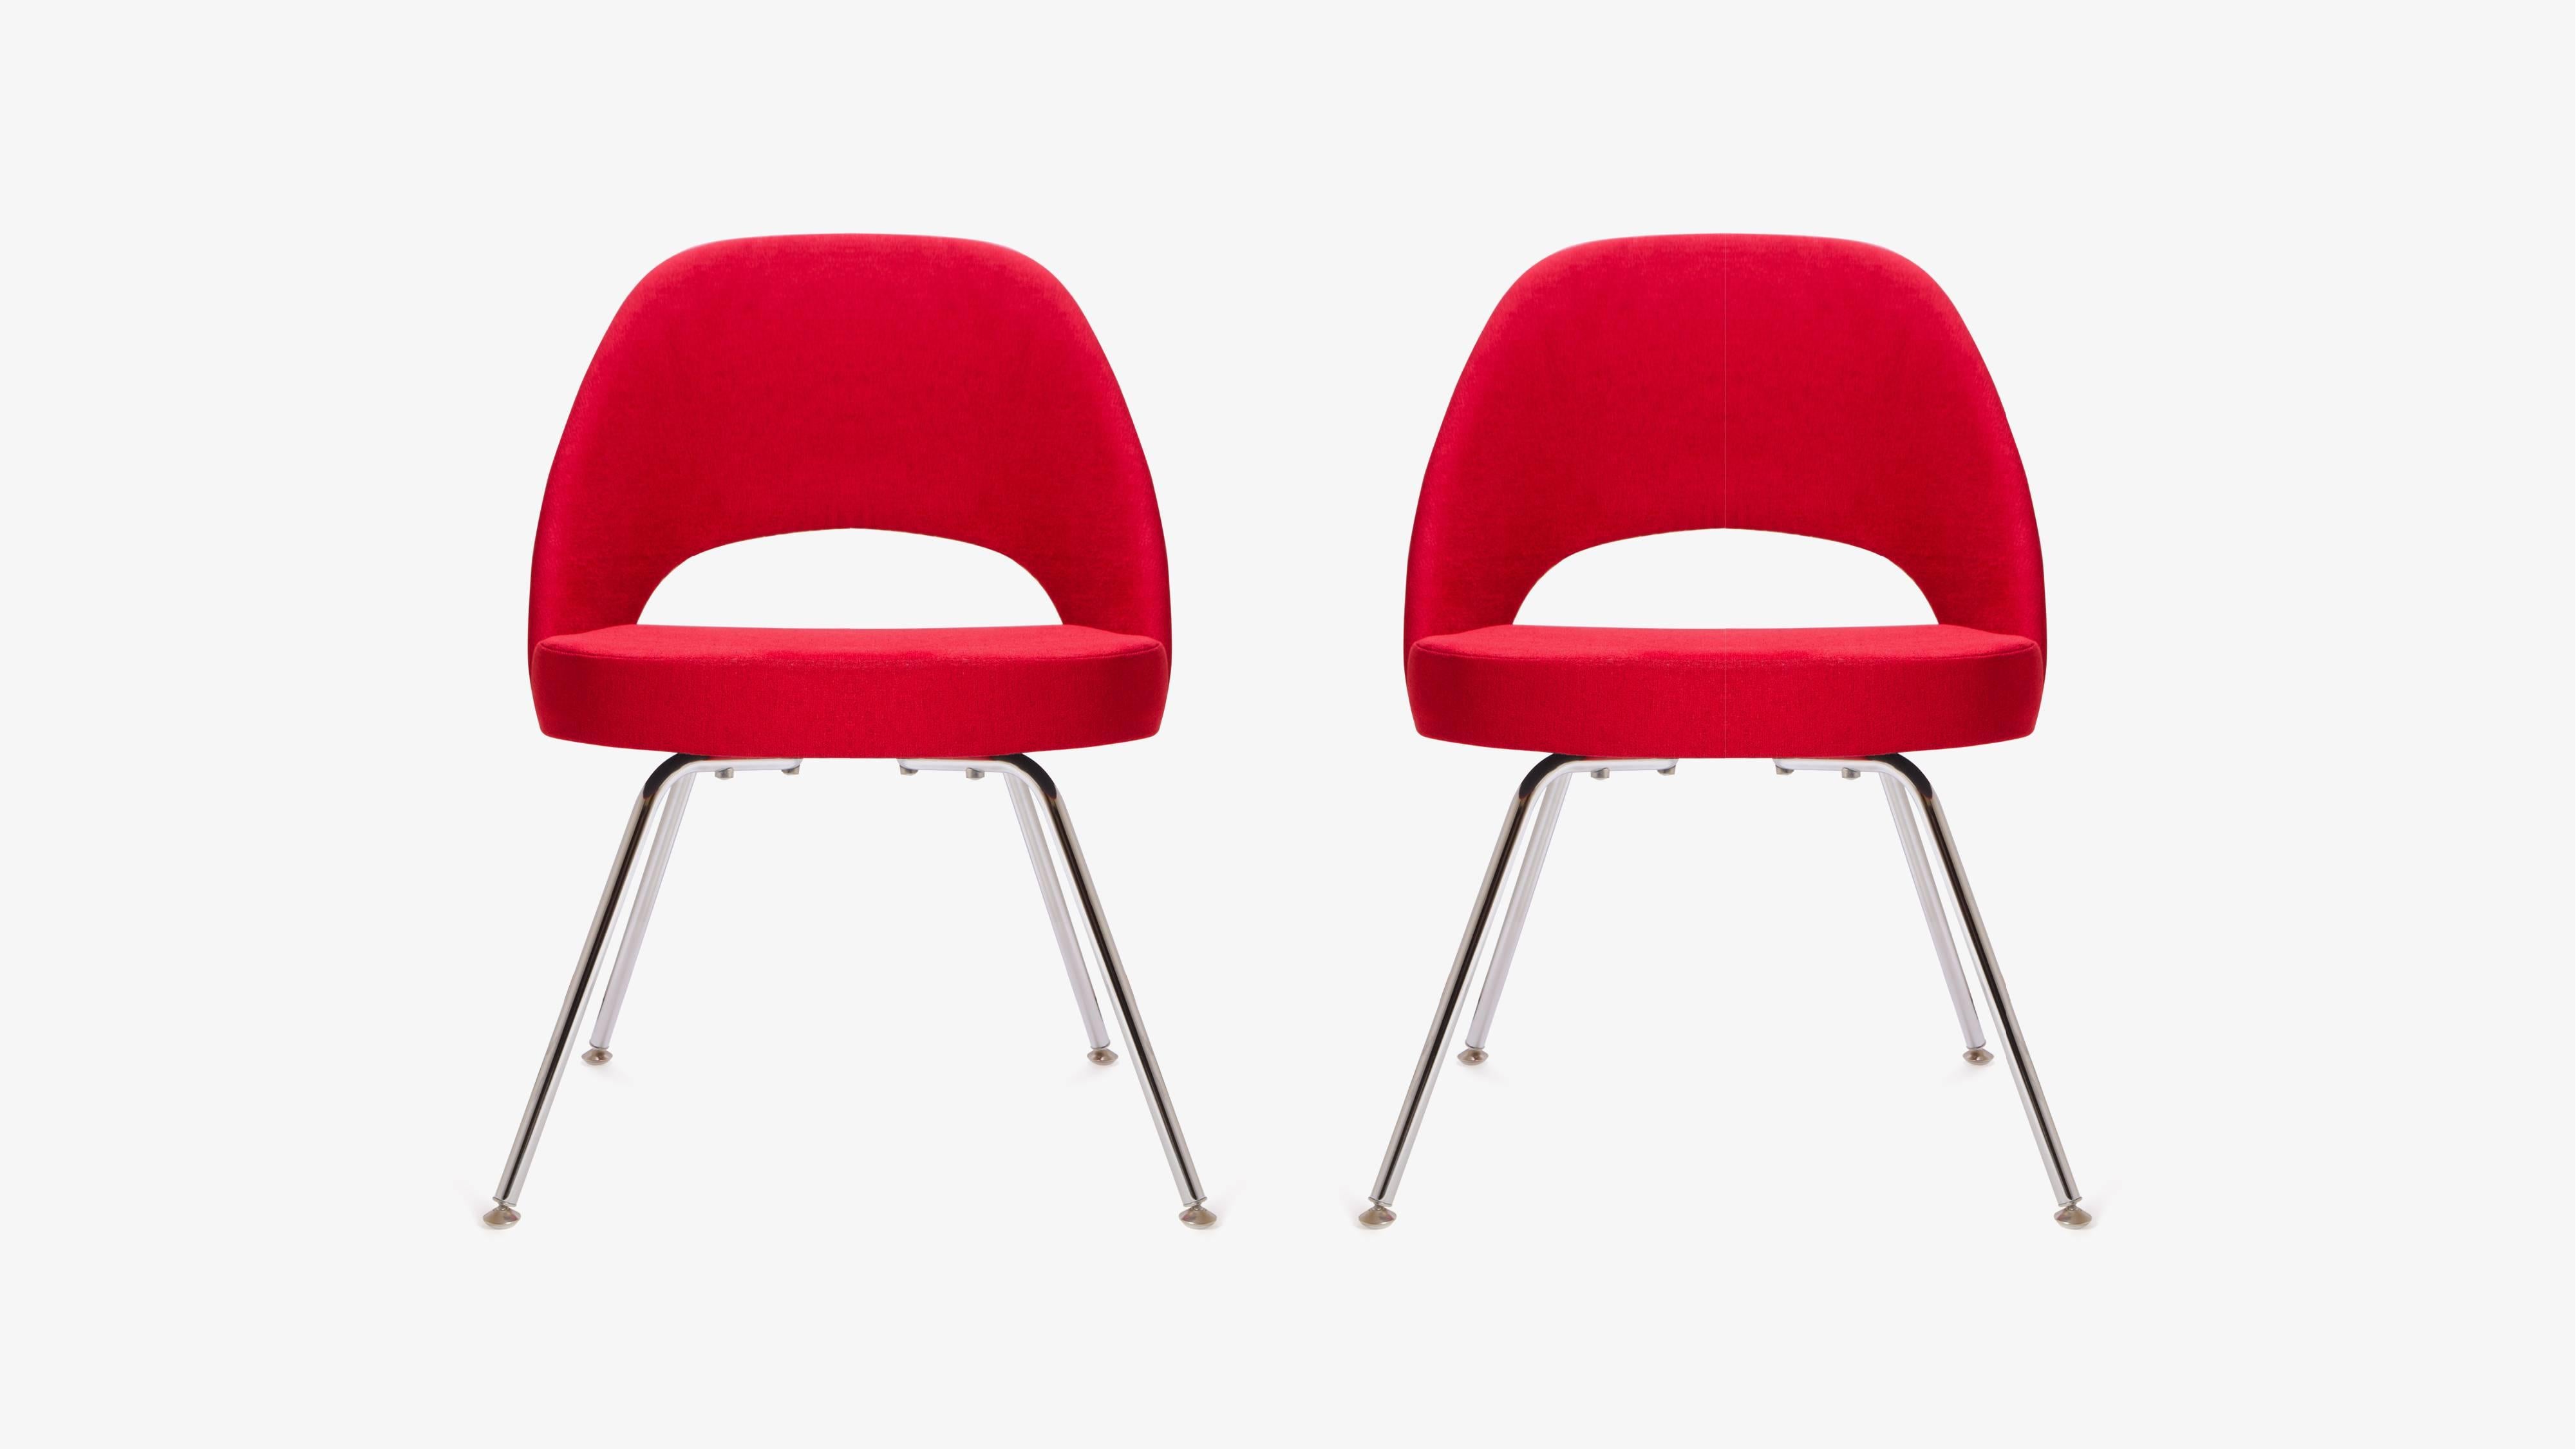 Mid-Century Classic Eero Saarinen executive armless chairs, manufactured by Knoll Furniture. These are upholstered in an original knoll textile fire-red fabric. Literally in brand new condition, foam on the seat and back maintain original shape and